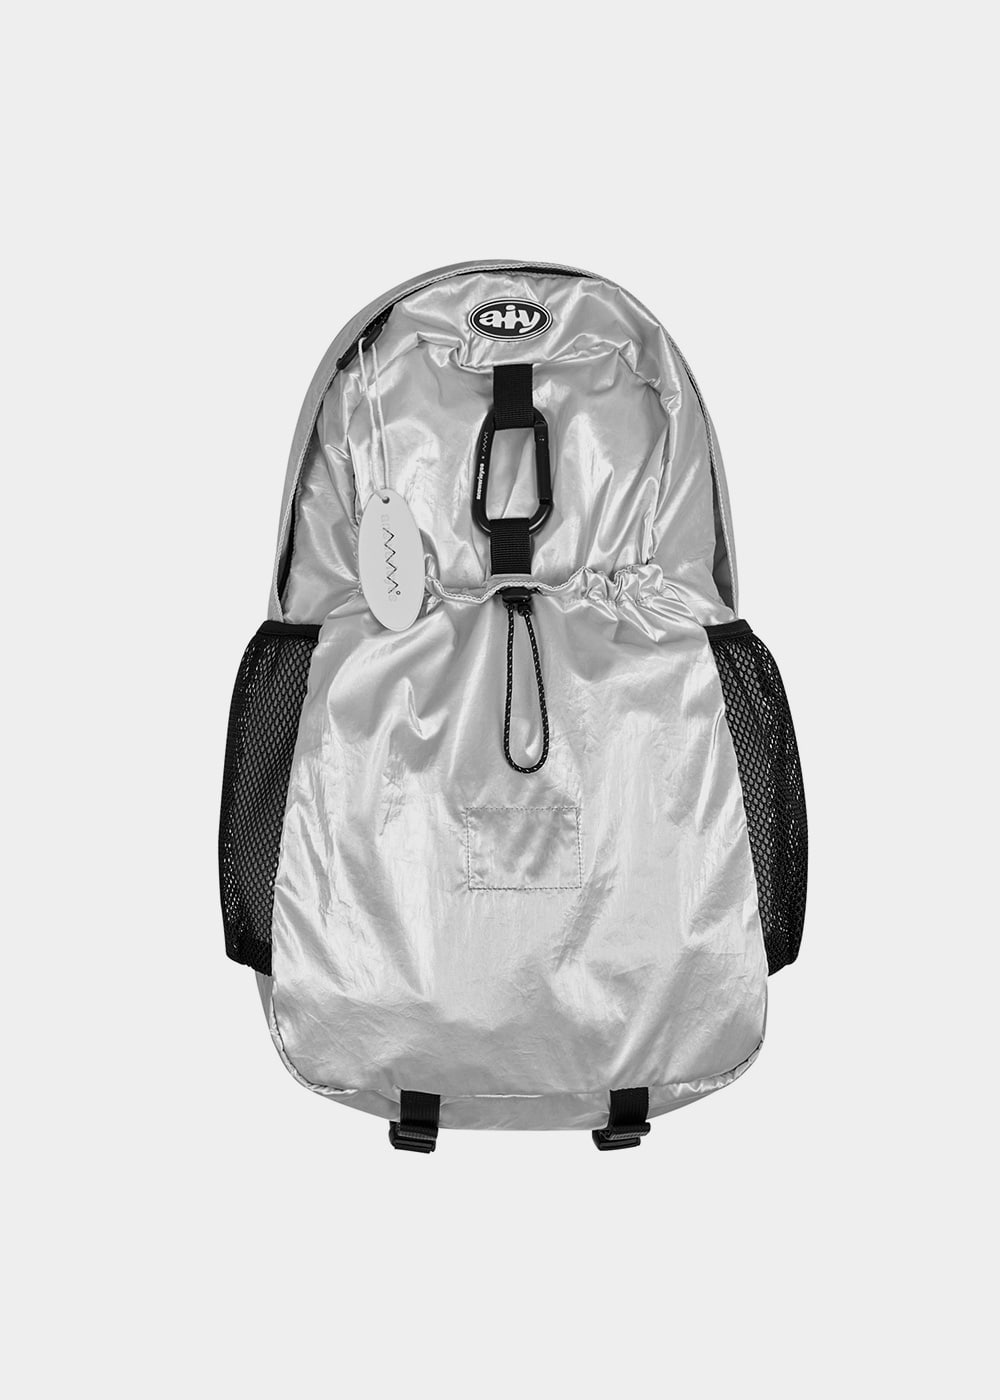 aiy x mmo backpack glossy silver 085